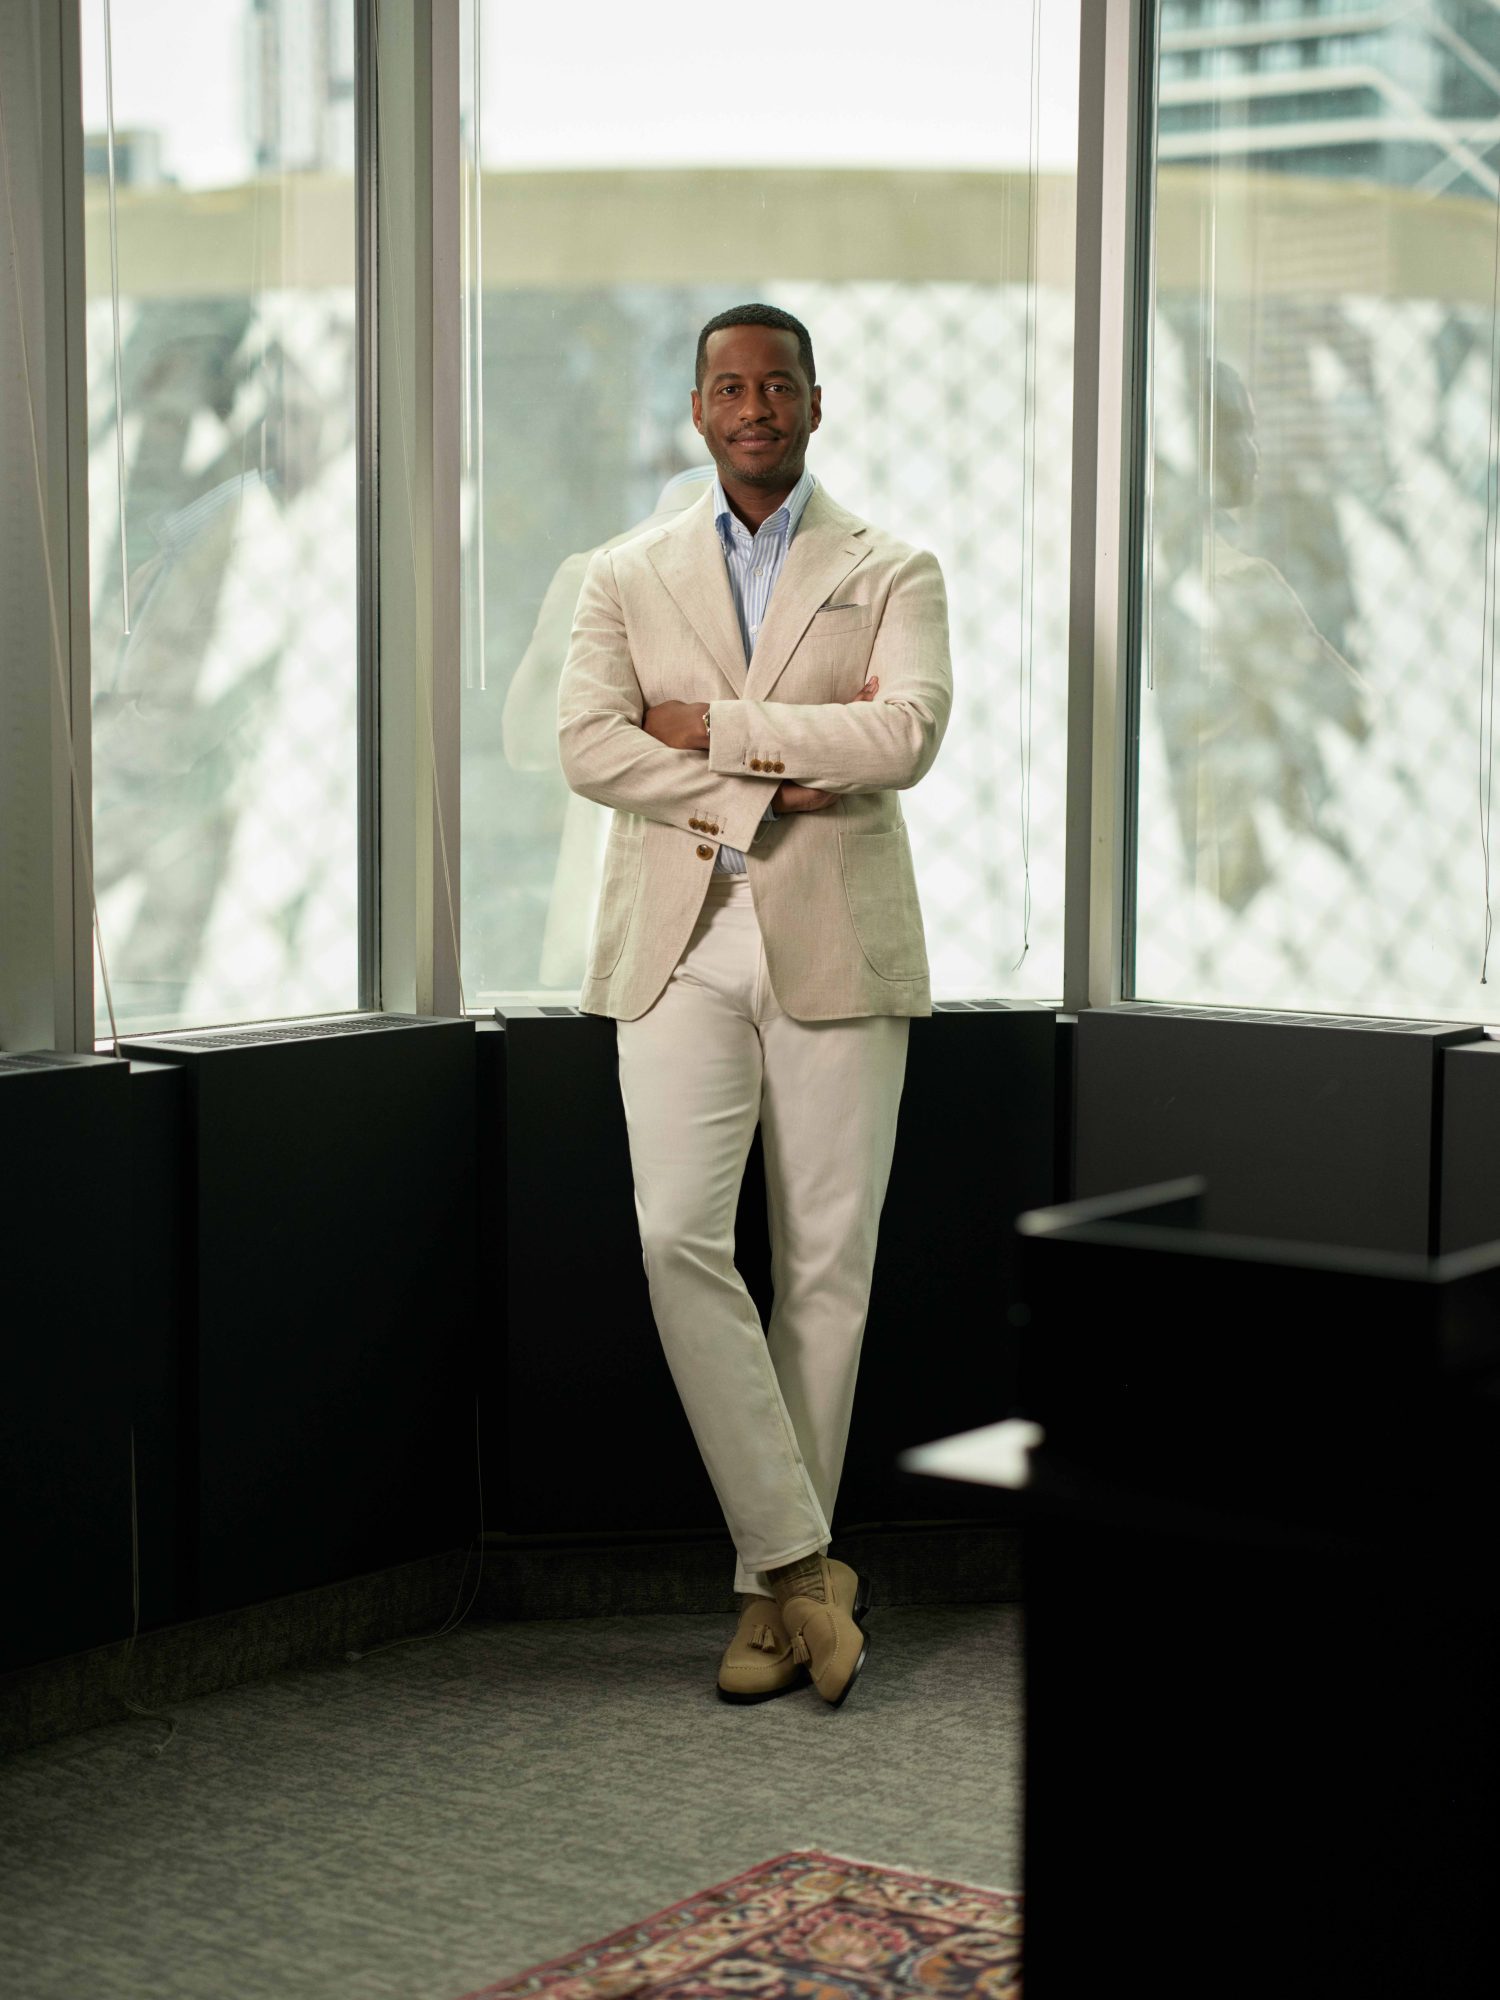 Toronto Symphony Orchestra CEO Mark Williams standing in a white suit with arms crossed and leaning against a wall in his office.